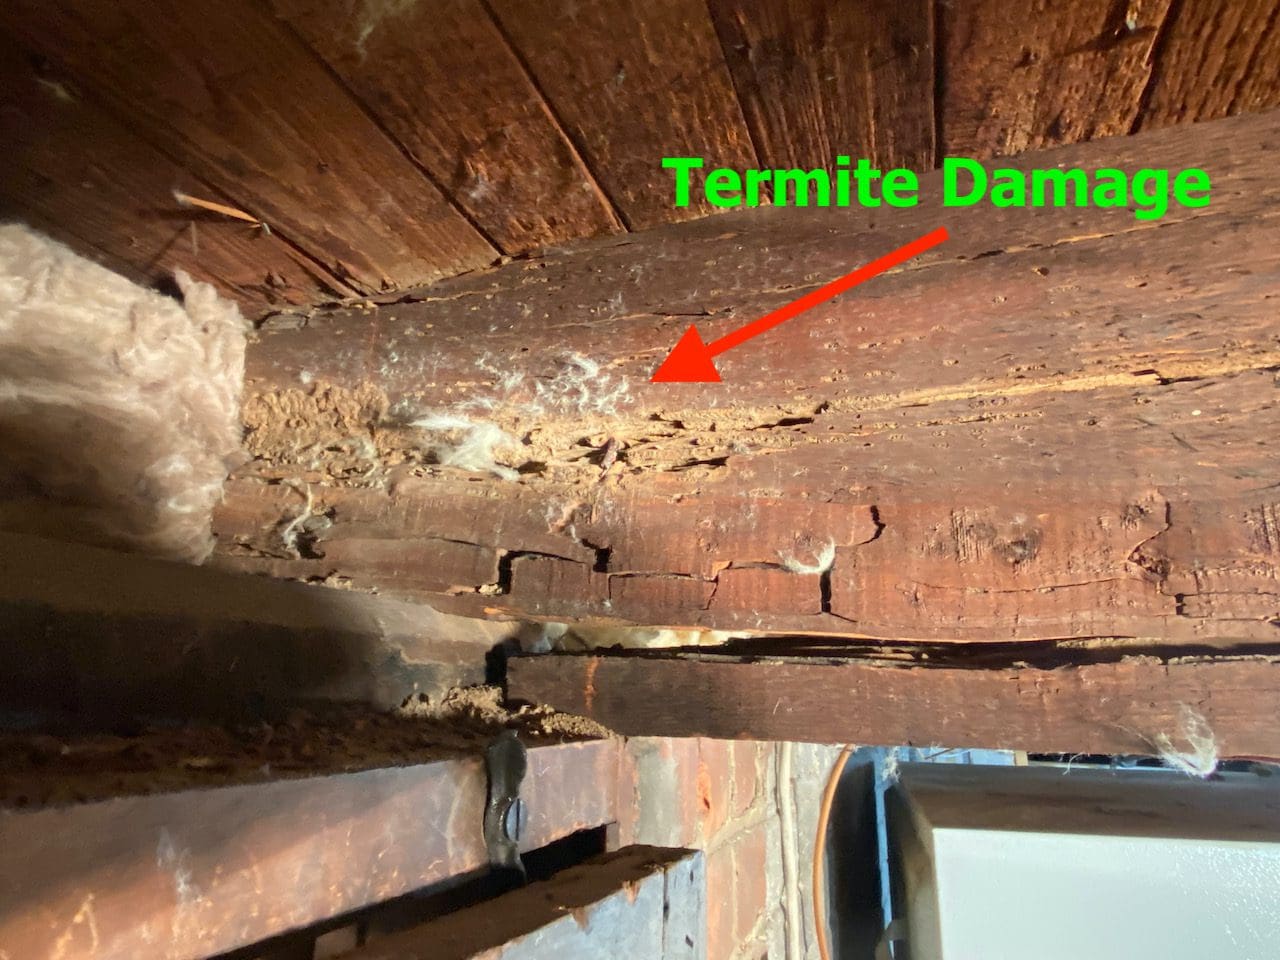 Look At the Termite Damage On The Basement